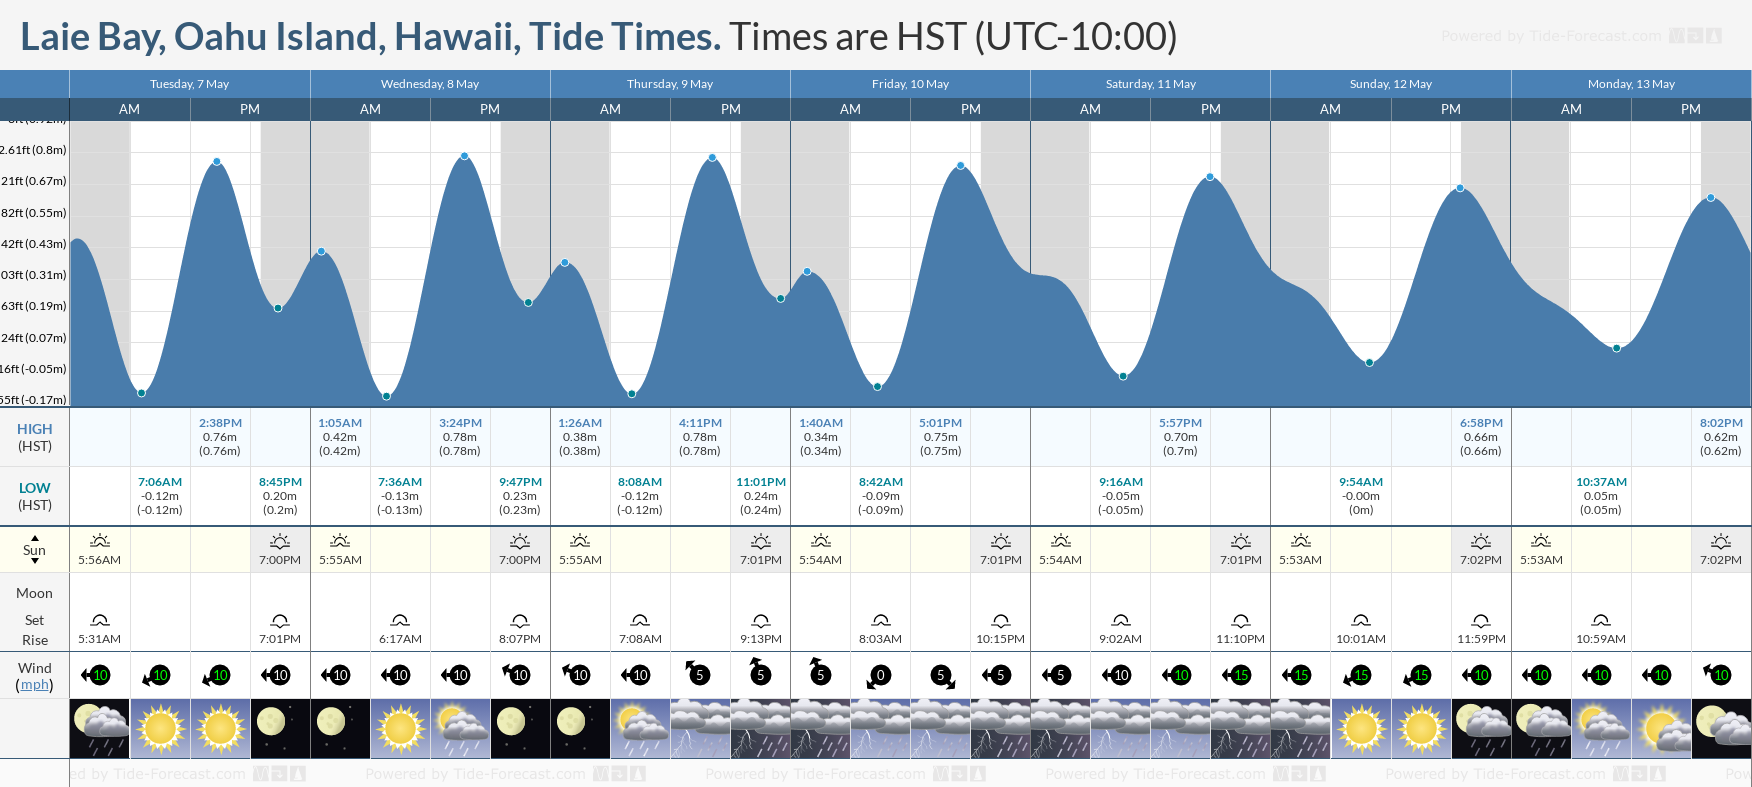 Laie Bay, Oahu Island, Hawaii Tide Chart including high and low tide times for the next 7 days